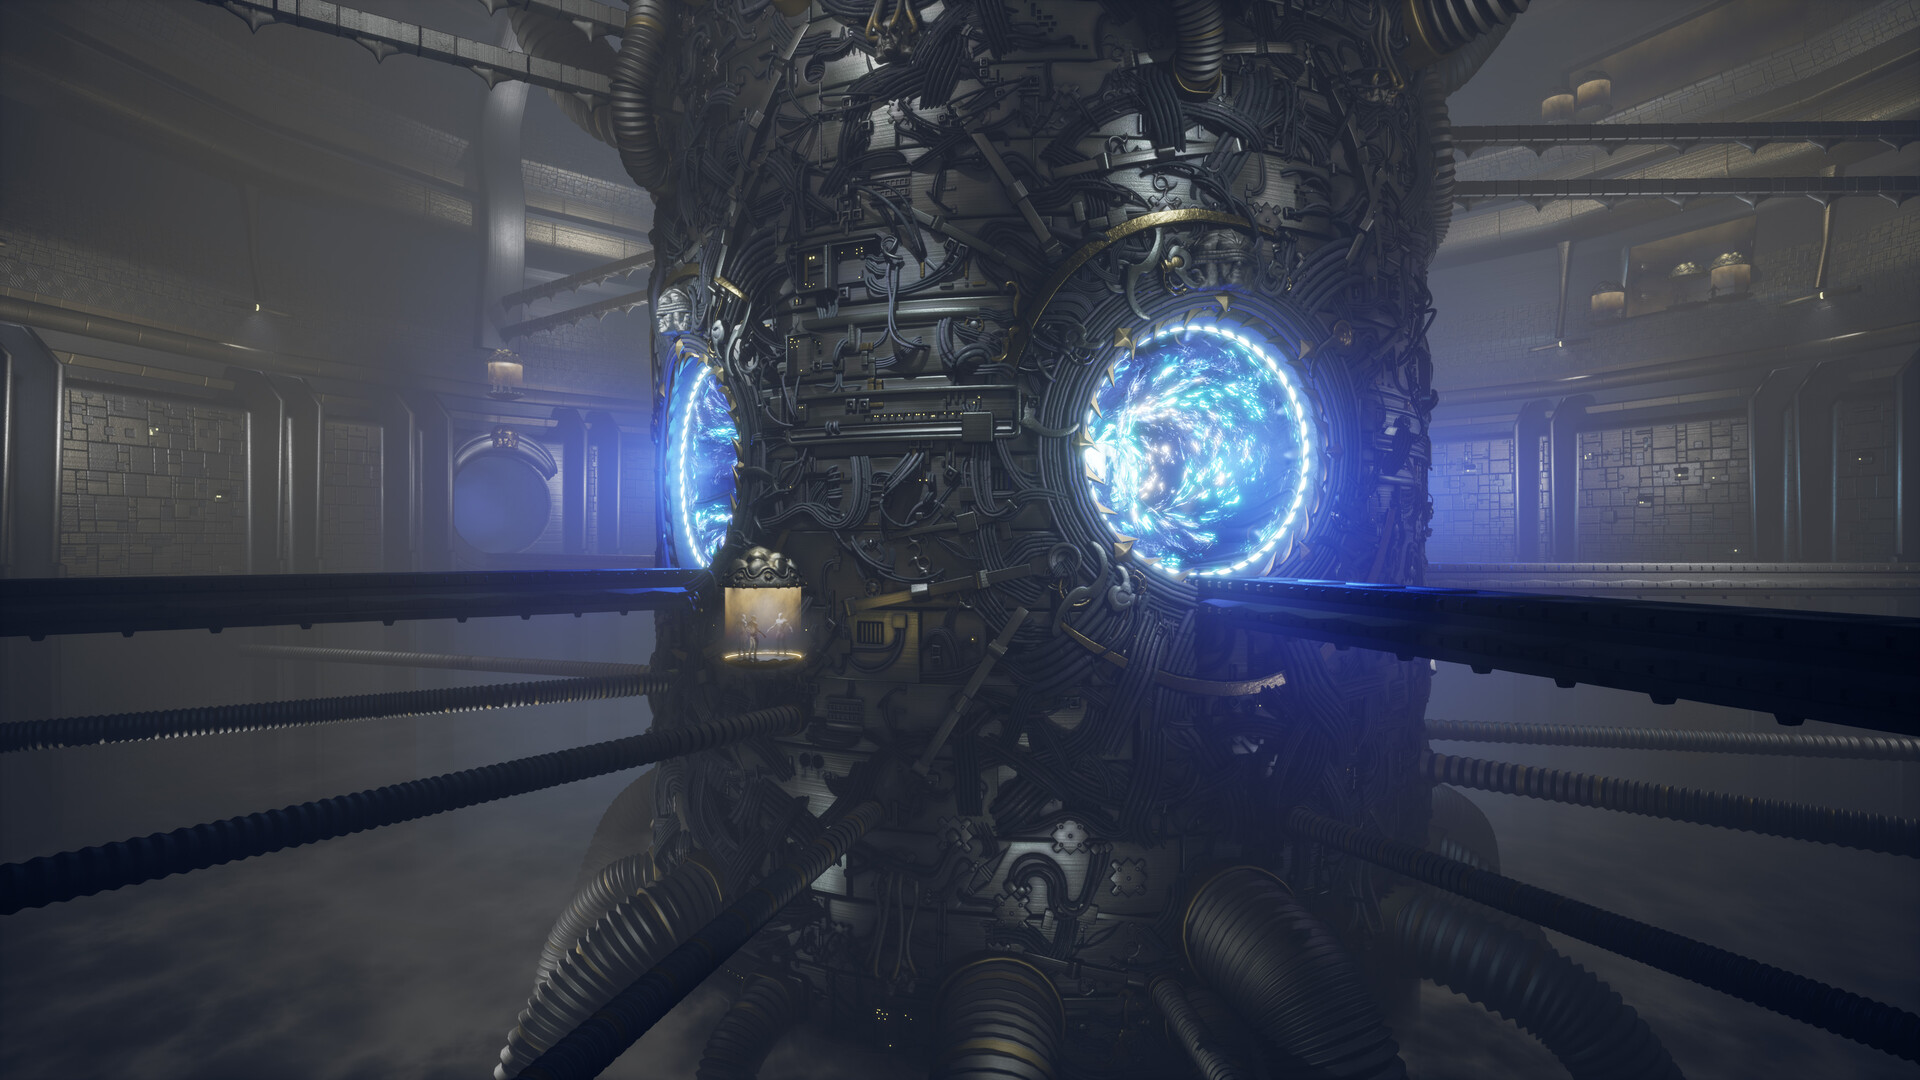 Main angle camera screenshot from Unreal 4. Progress from last post showcases lots of splashes of gold and yellow on the surfaces of the portal cylinder and its greebles. There is also some of that, together with sci-fi, square grid wall textures, in the background.